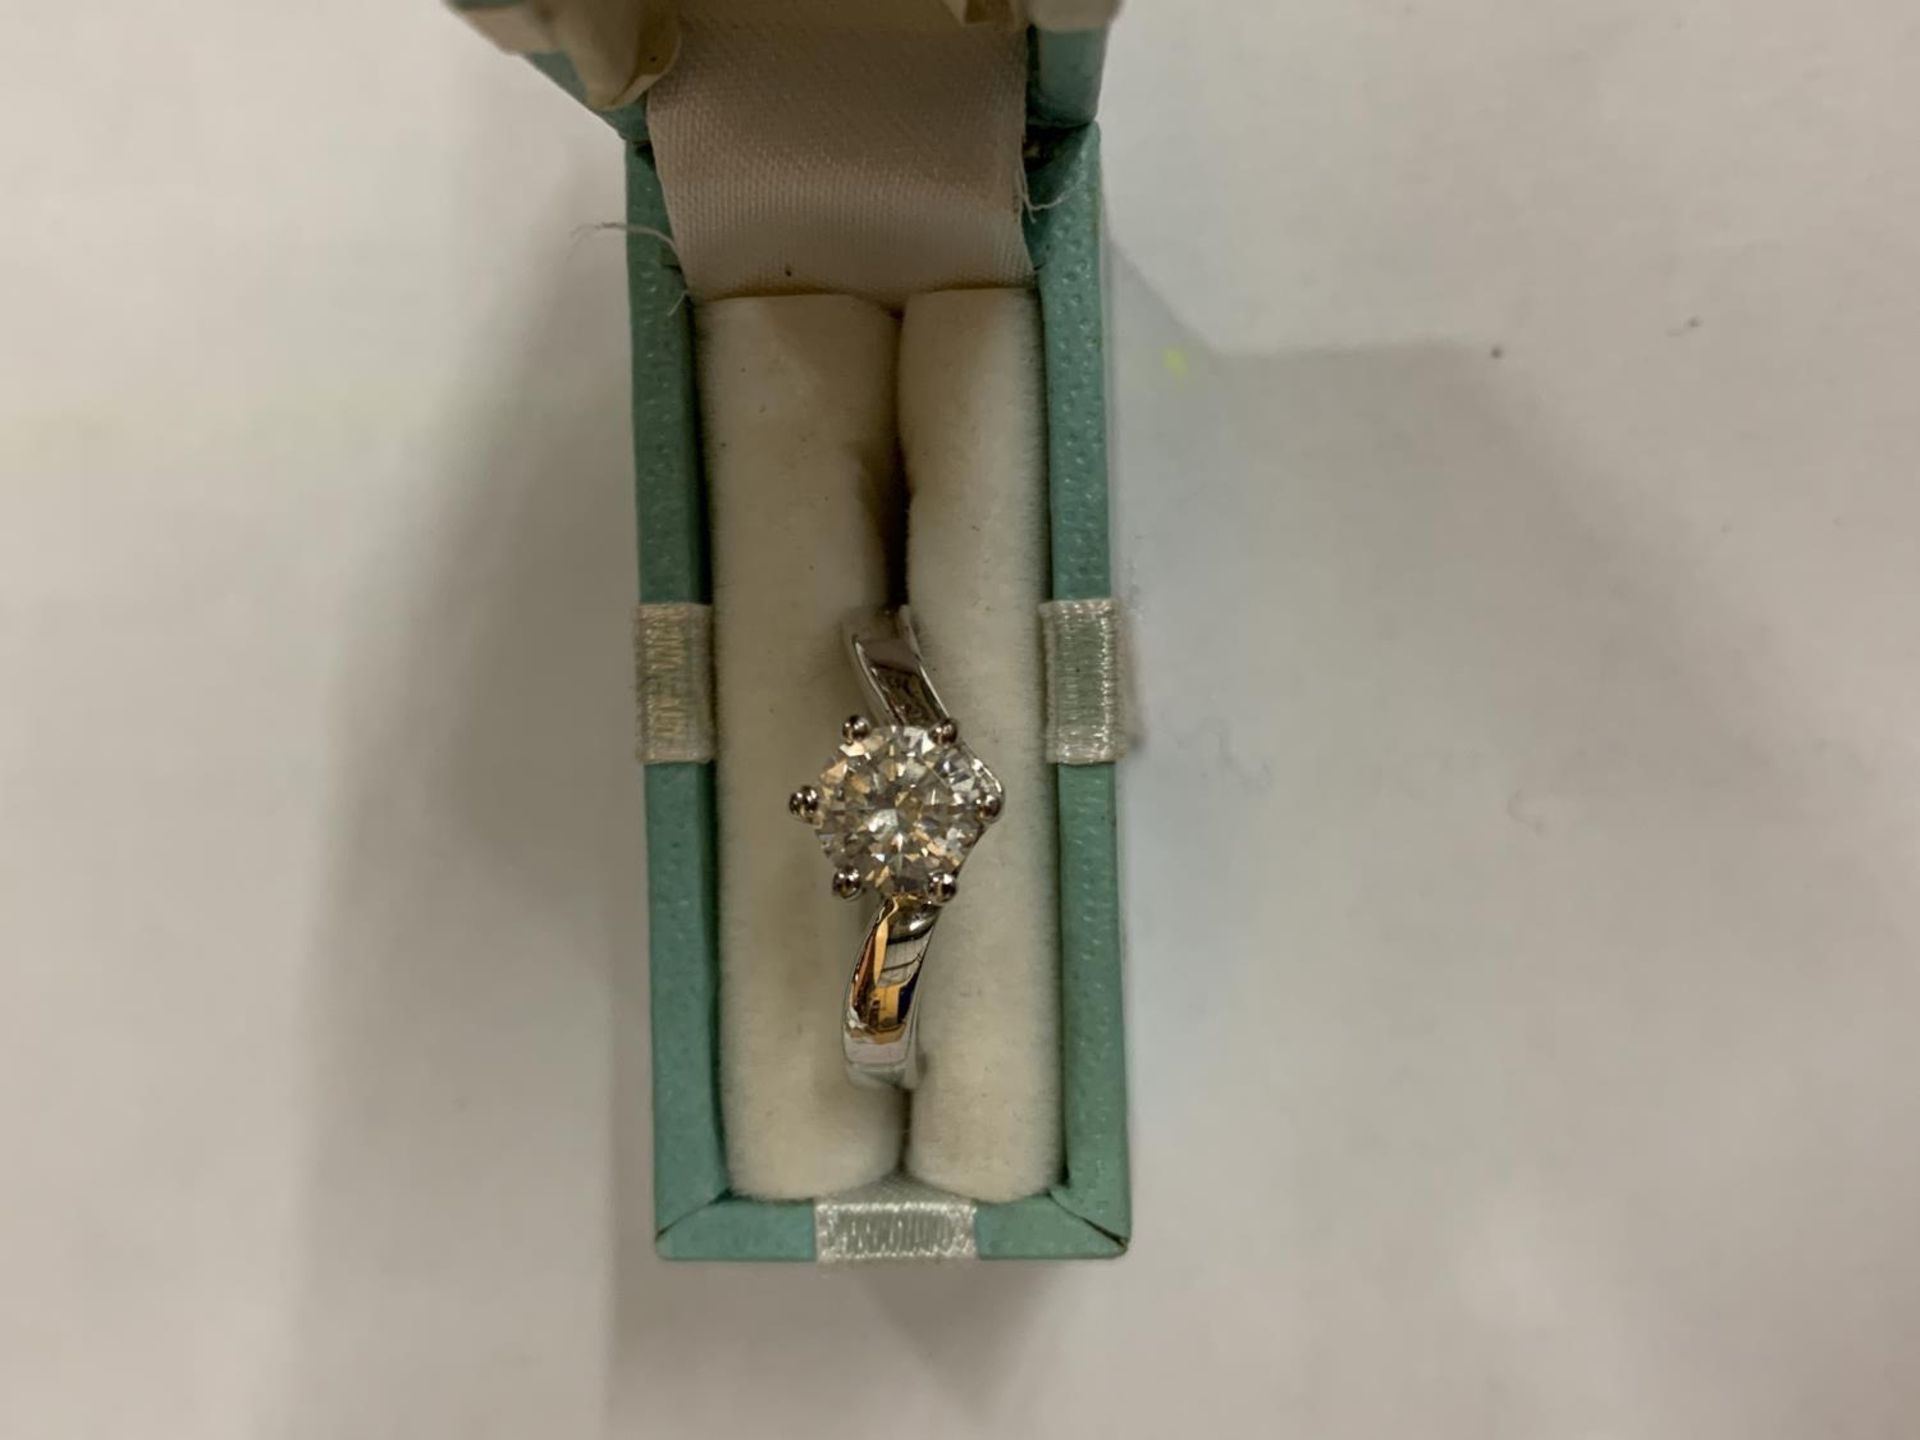 A SILVER SOLITAIRE RING IN A PRESENTATION BOX - Image 4 of 4